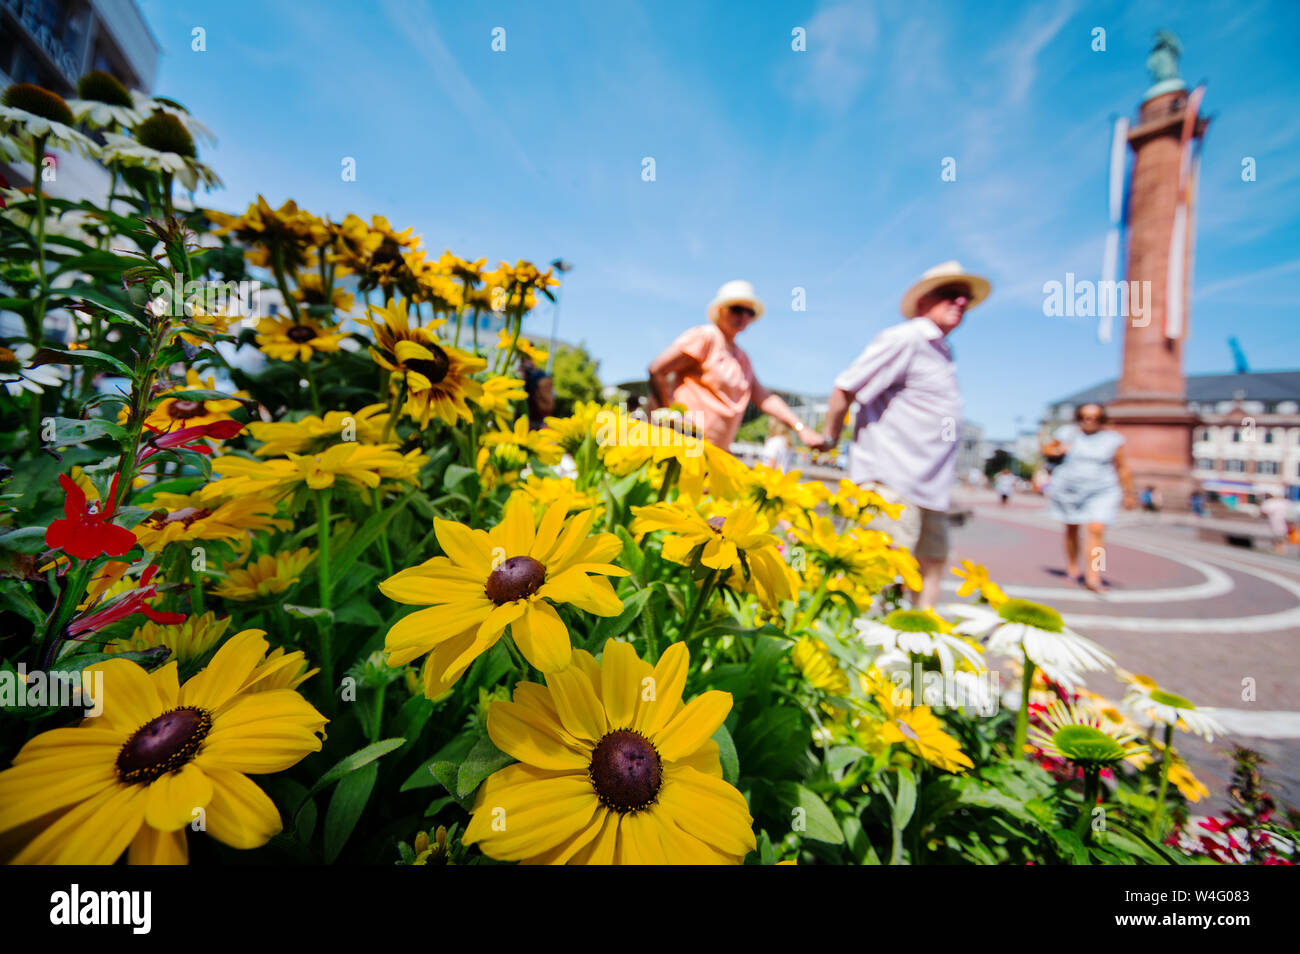 Darmstadt, Germany. 23rd July, 2019. Two people in a sun hat walk past a flower stand. In the background is the Darmstadt landmark of the 'Lange Ludwig'. Credit: Andreas Arnold/dpa/Alamy Live News Stock Photo